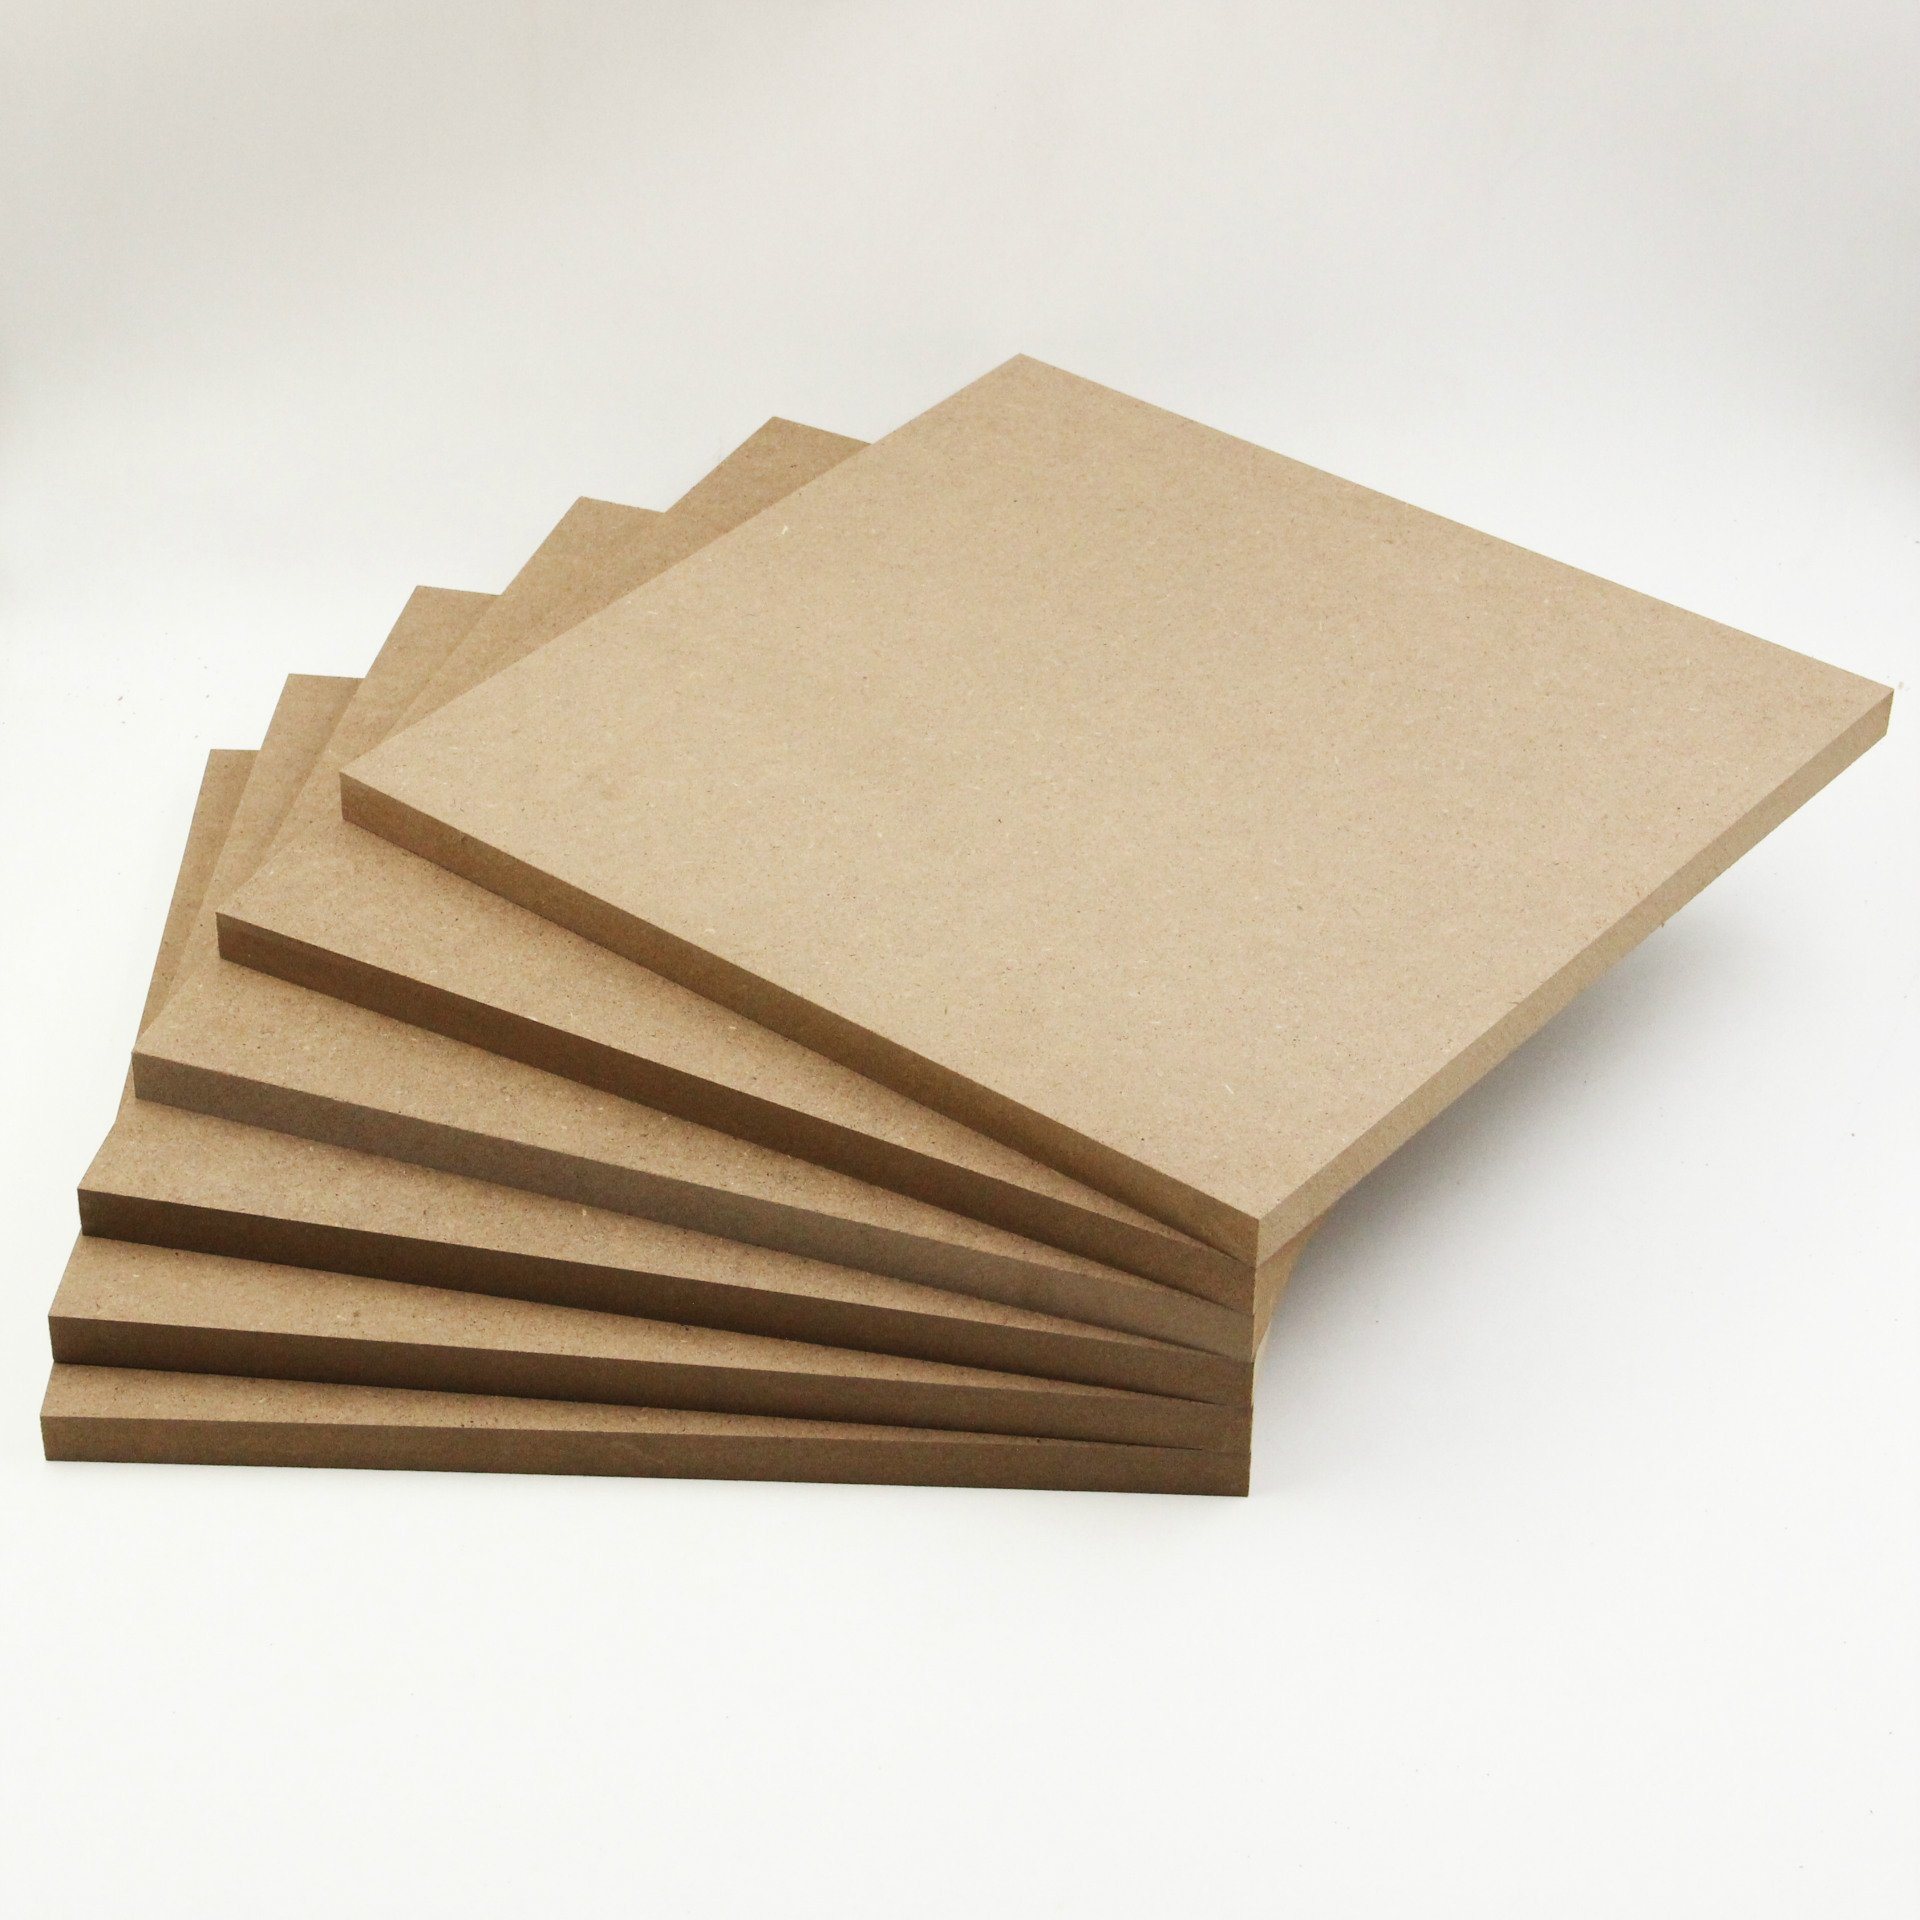 Plain MDF 6mm MDF Board for Wooden Toys